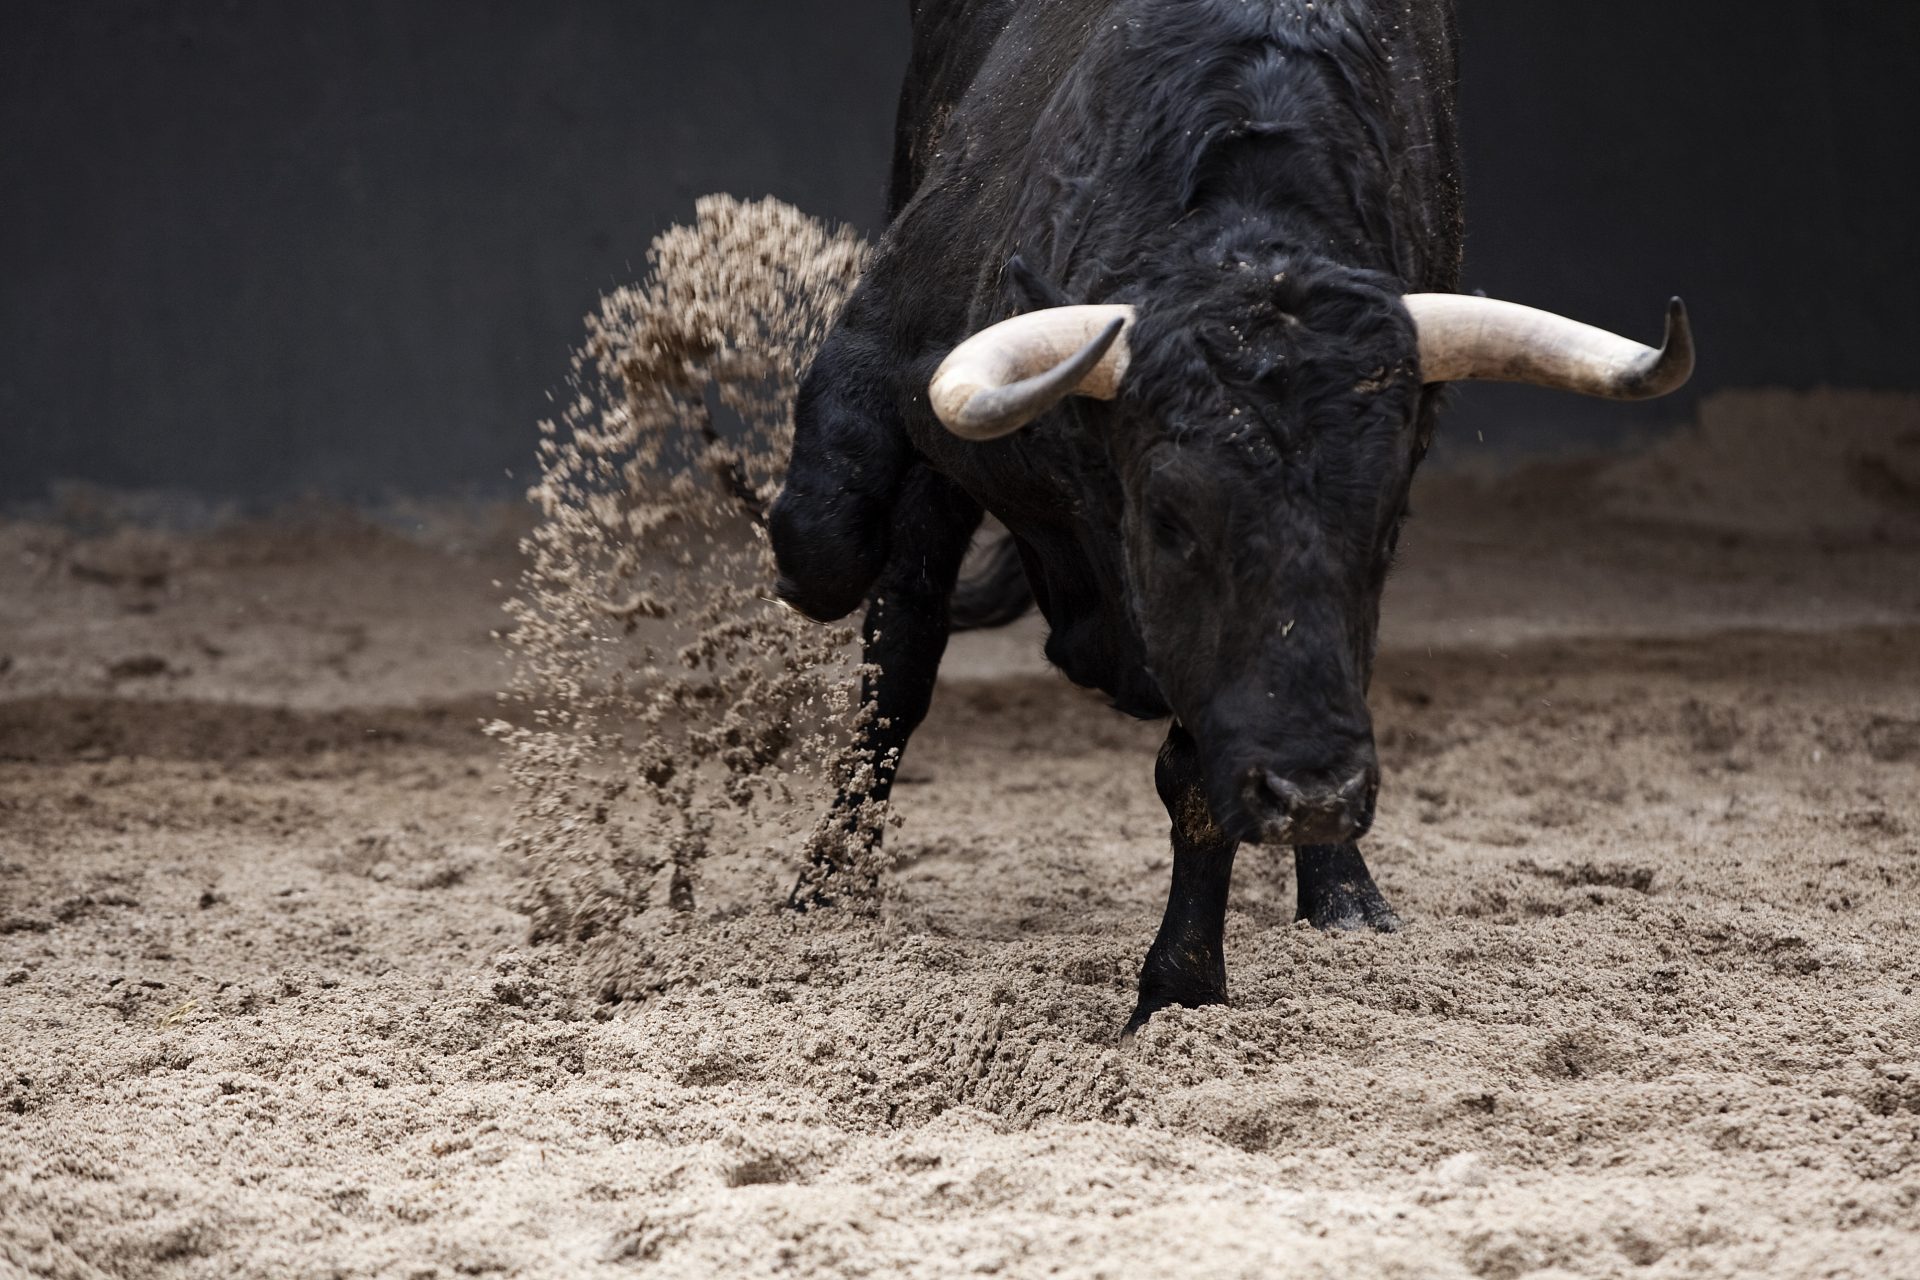 How do you stop a bull from charging?